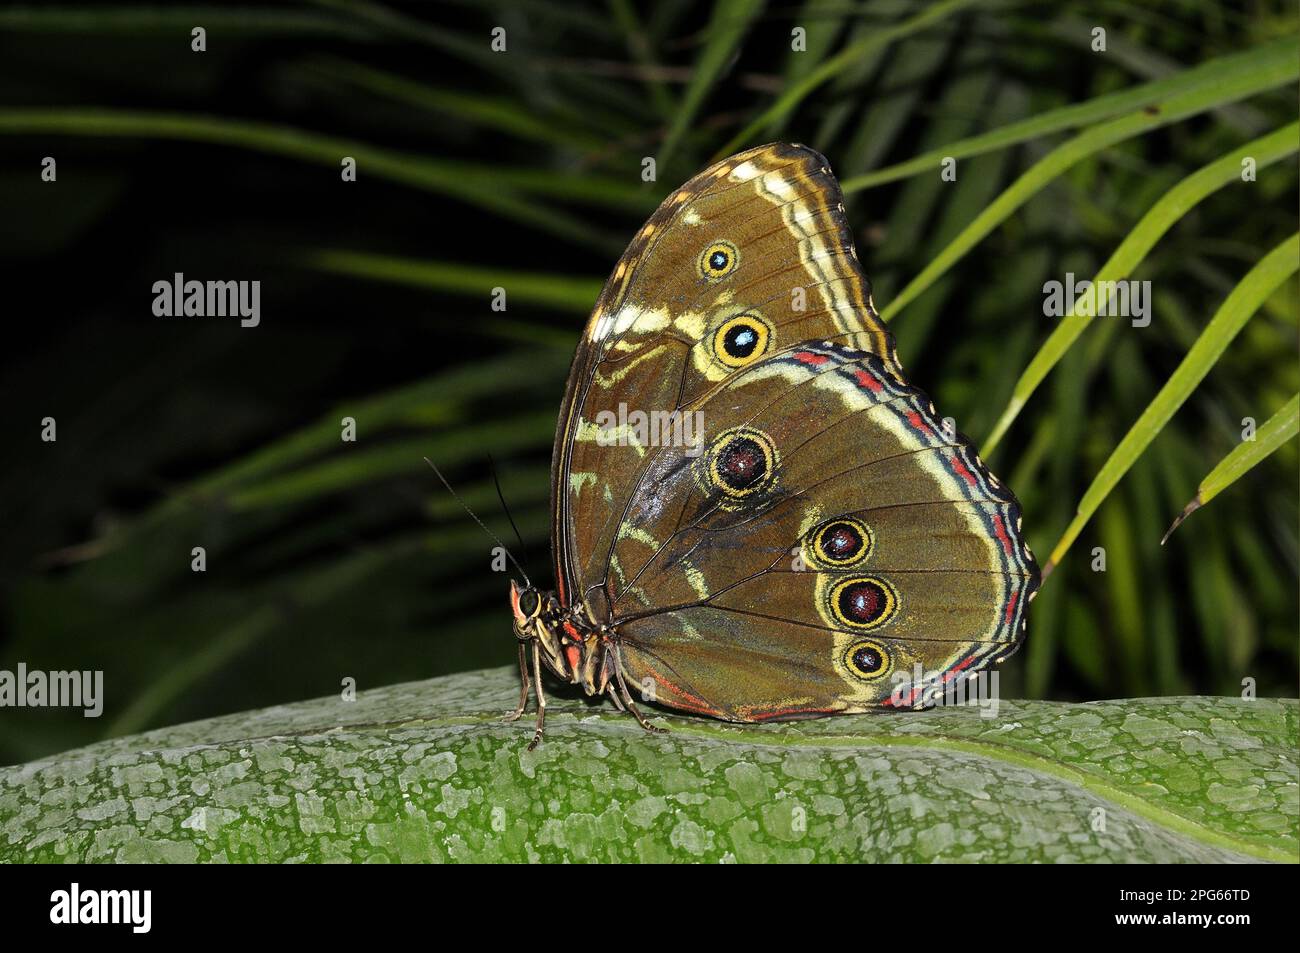 Blue morpho, peleides blue morpho (Morpho peleides), Sky butterfly, Blue morphos, Blue morpho butterflies, Other animals, Insects, Butterflies Stock Photo